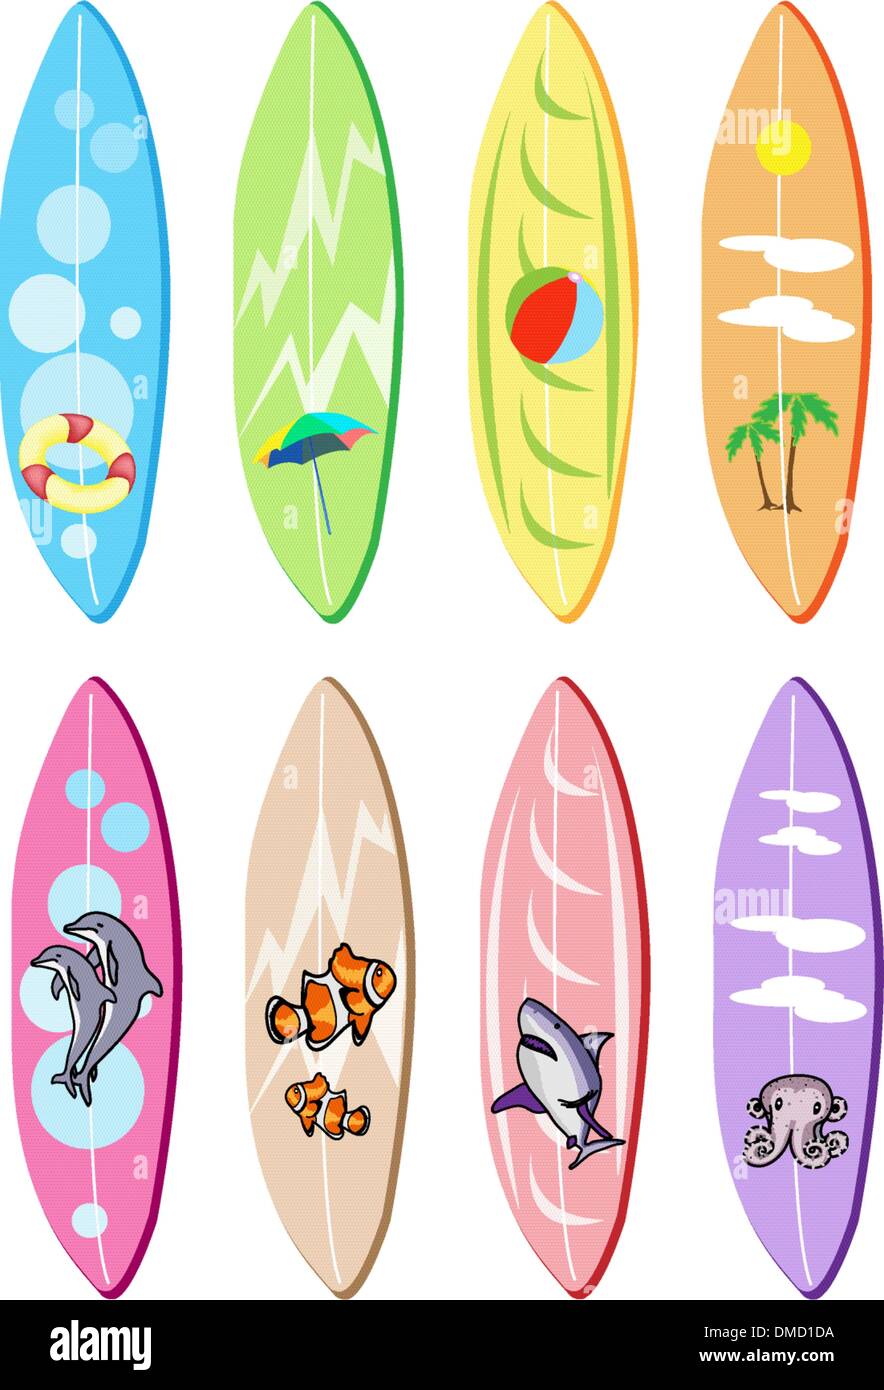 An Illustration Set of Surfboards with Different Designs Stock Vector